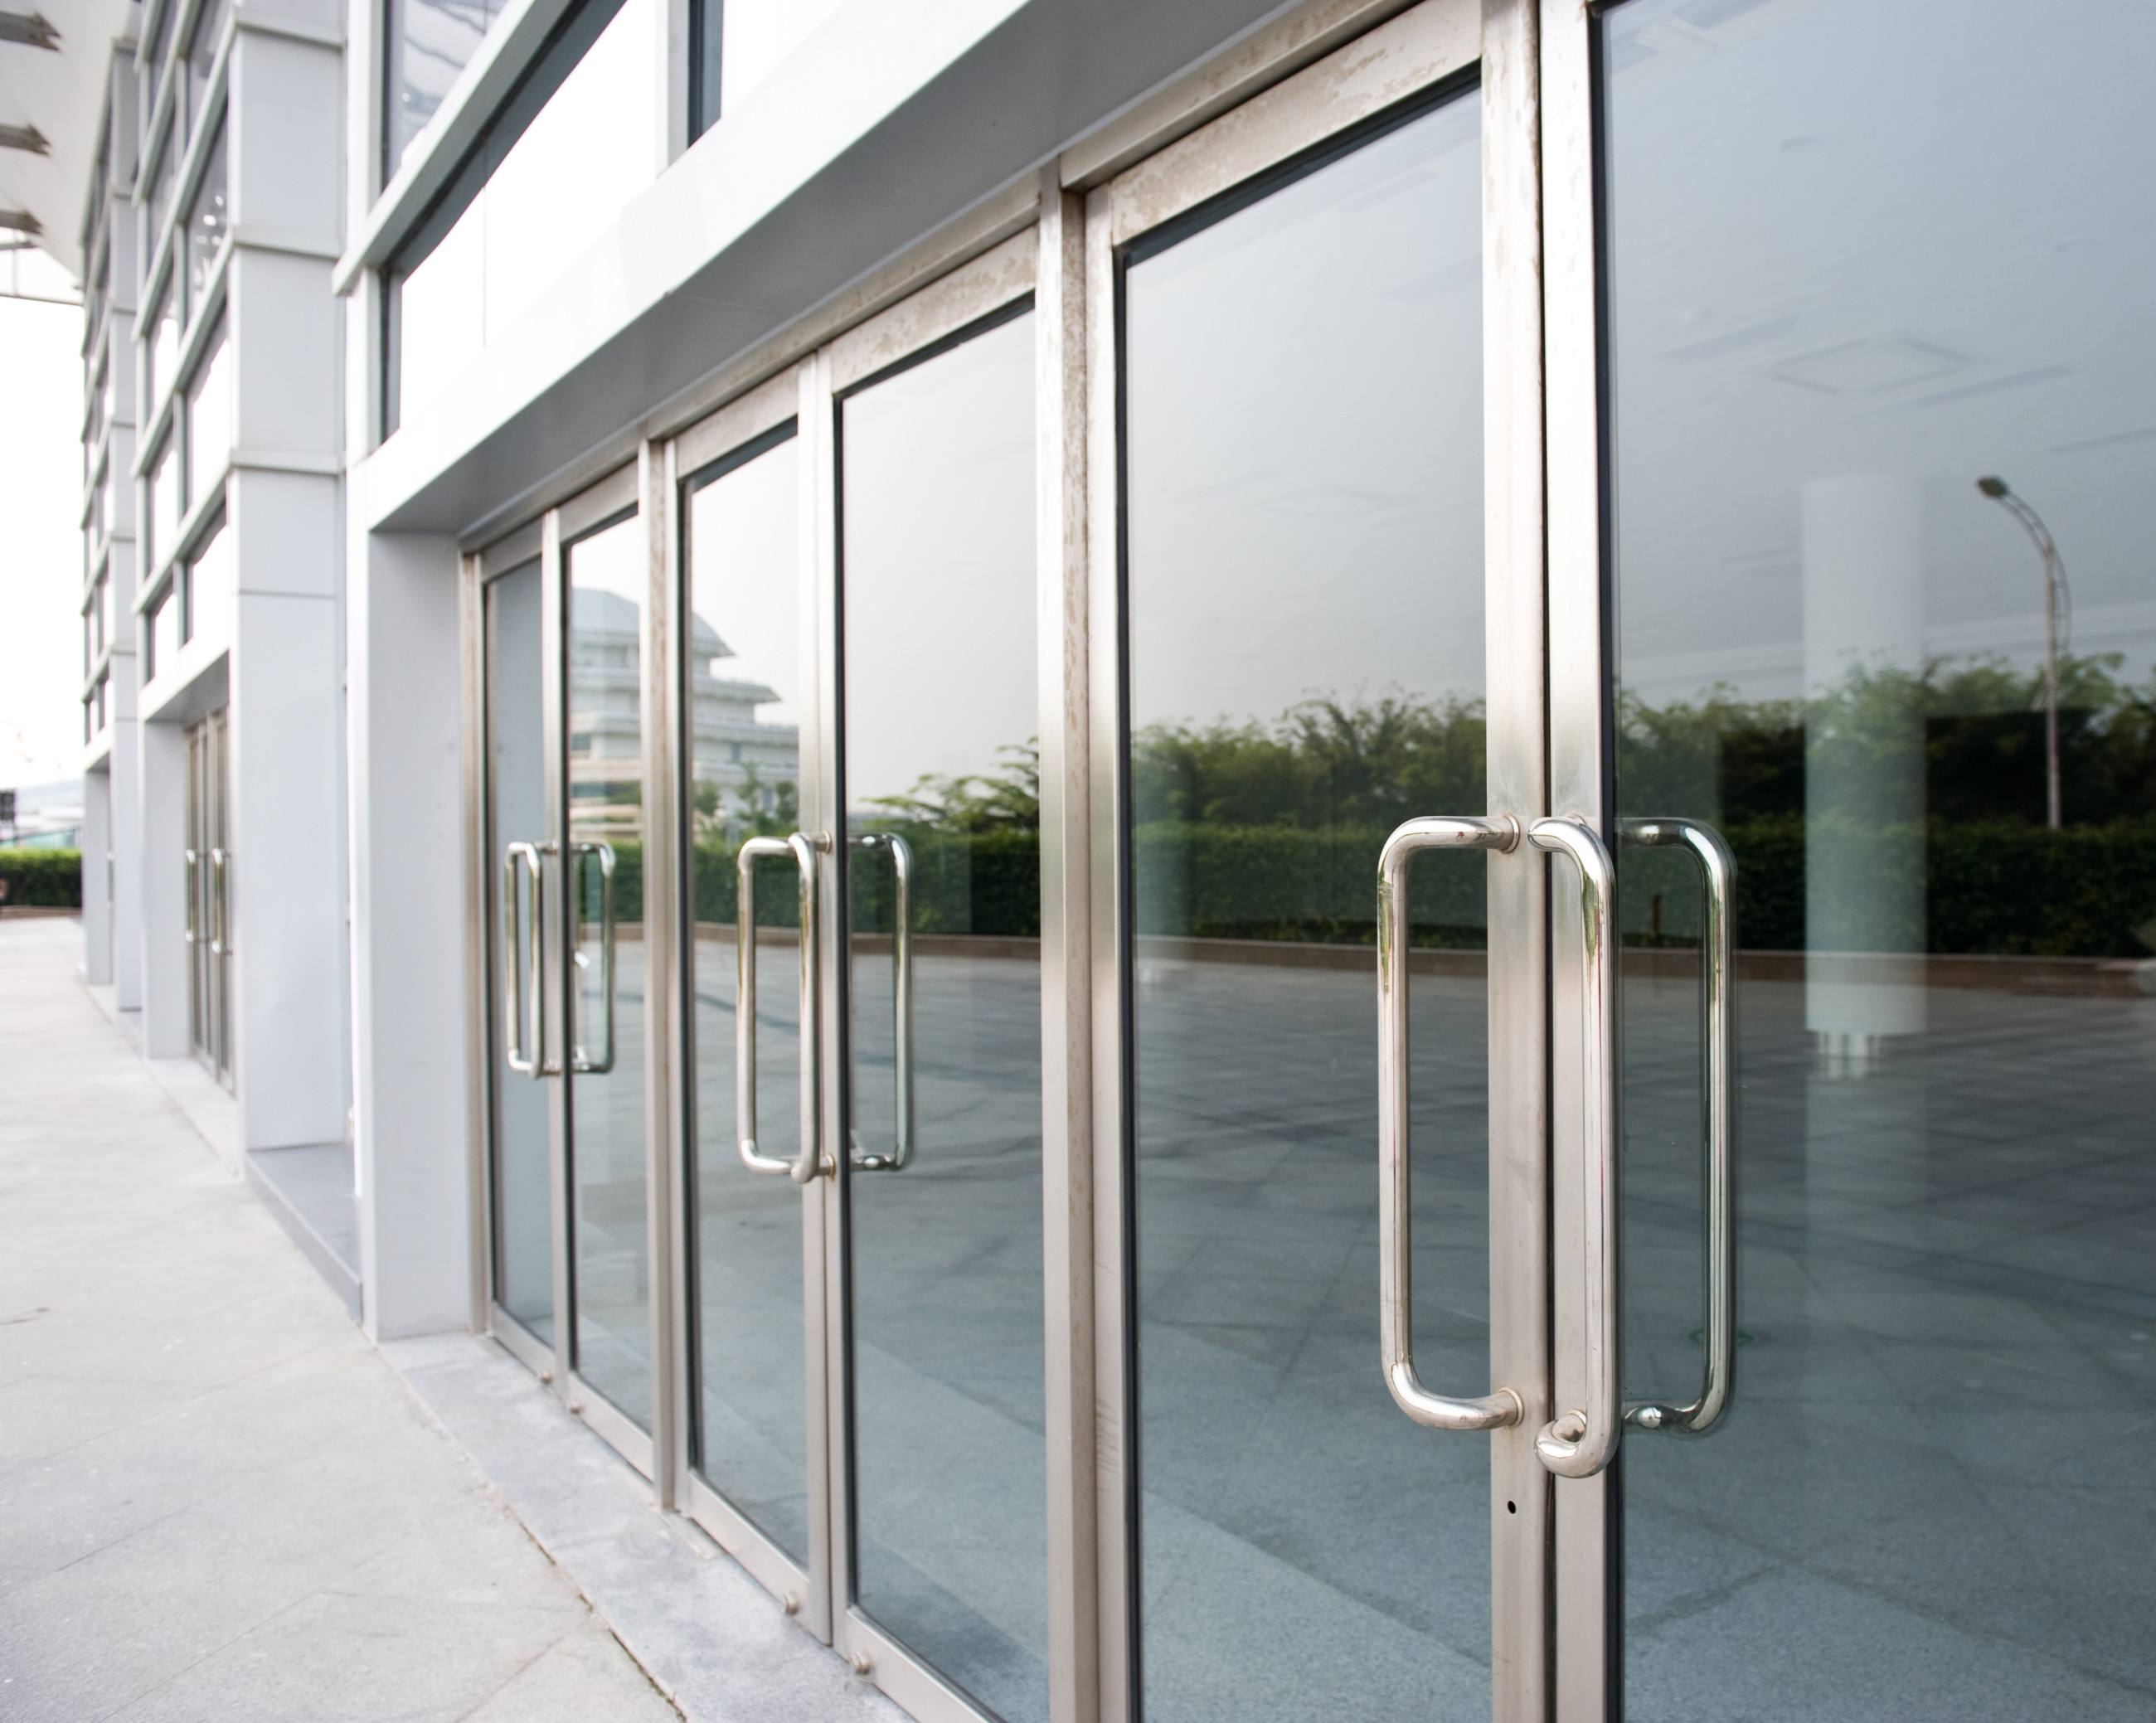 Commercial-grade safety glass on glass doors